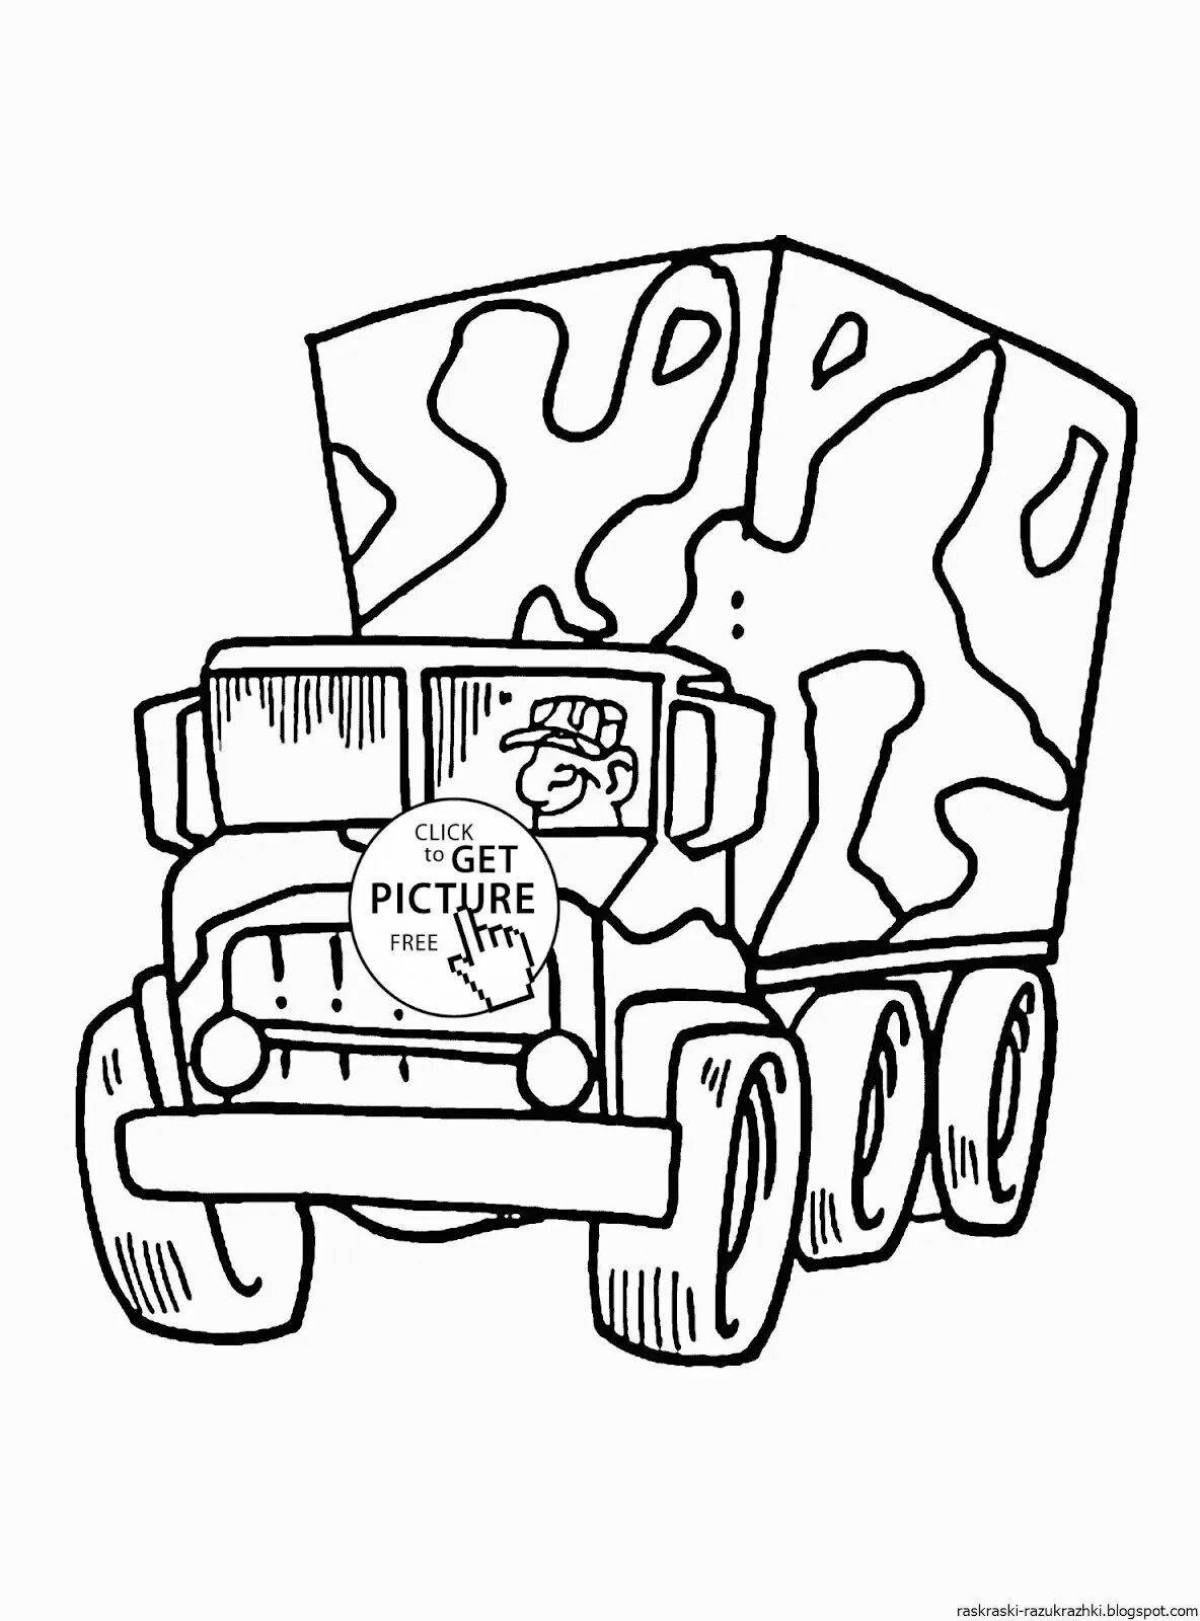 Amazing military vehicle coloring pages for kids